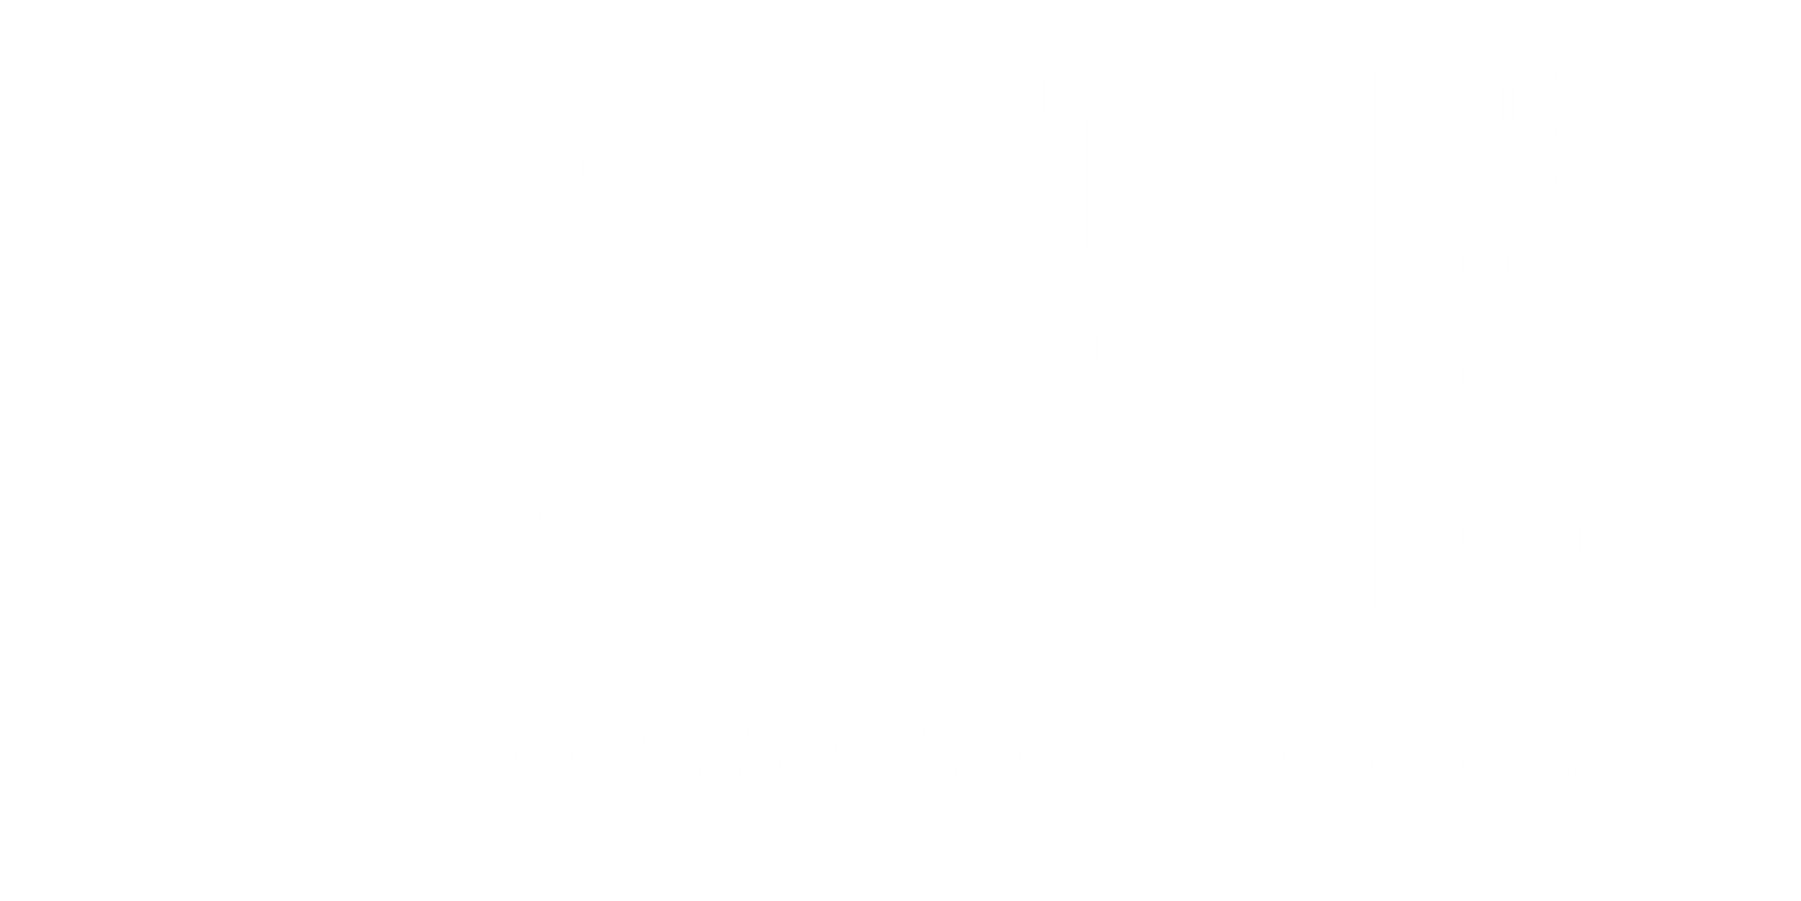 Regents West at 26th white logo.